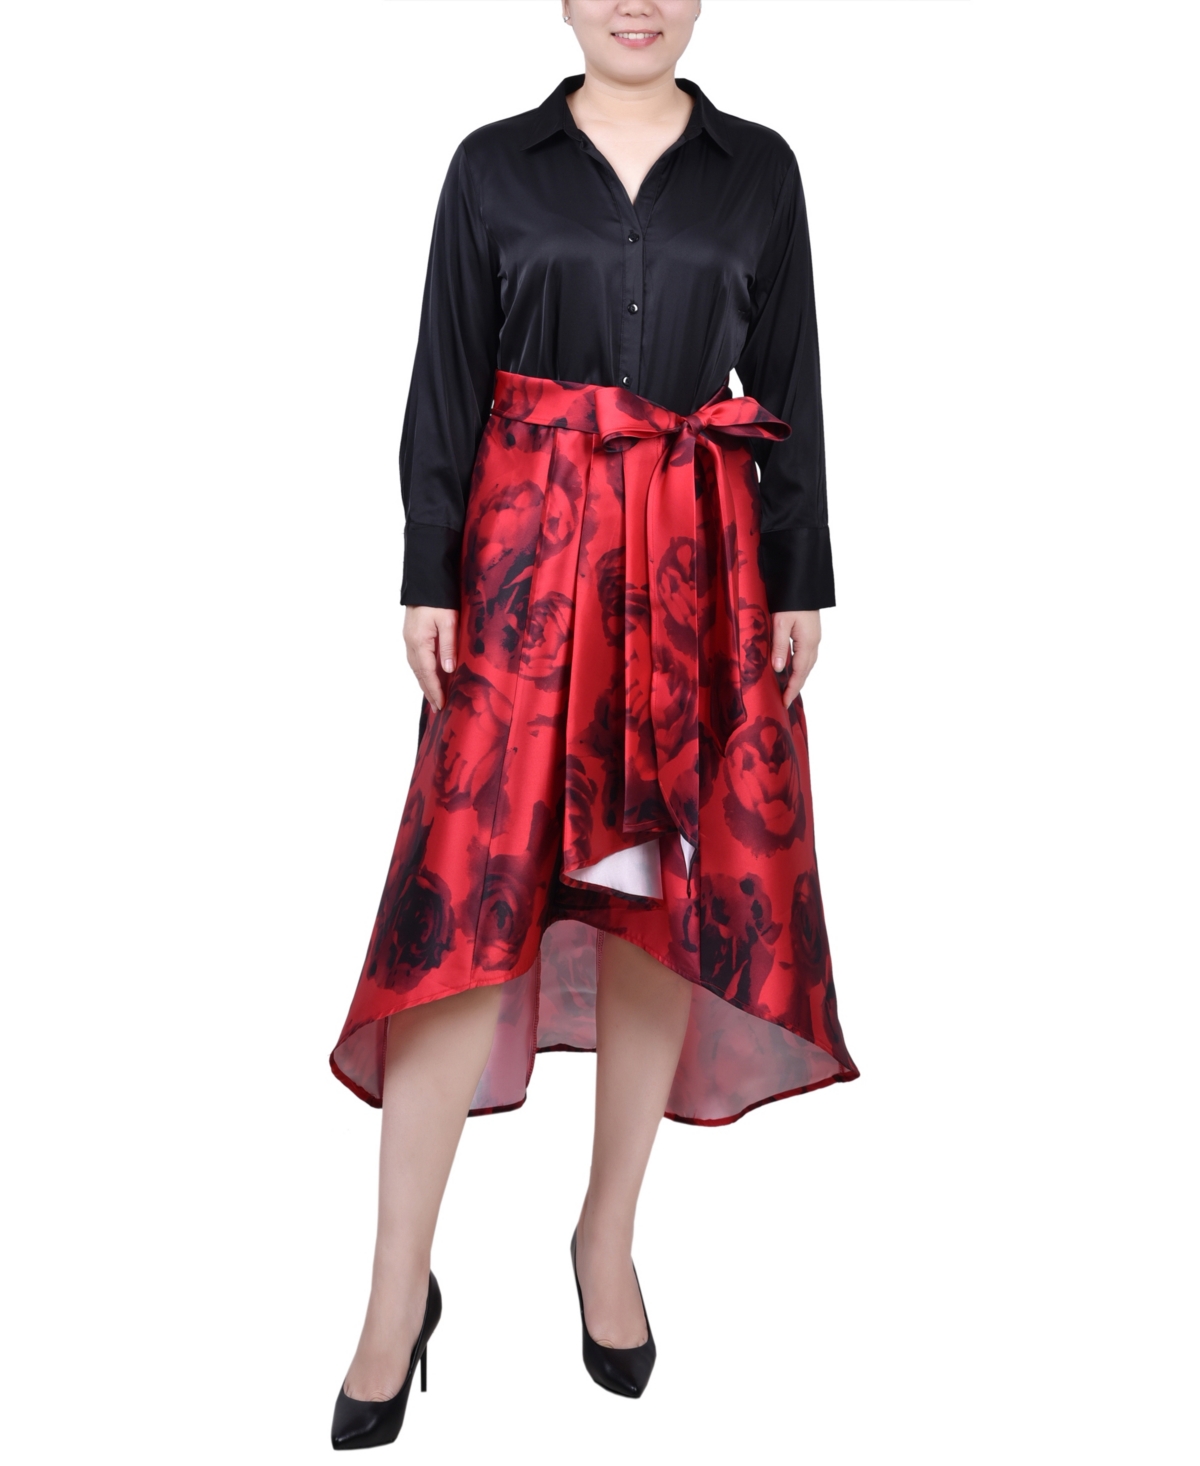 Ny Collection Petite Satin And Mikado High Low Dress In Red Black Floral Black